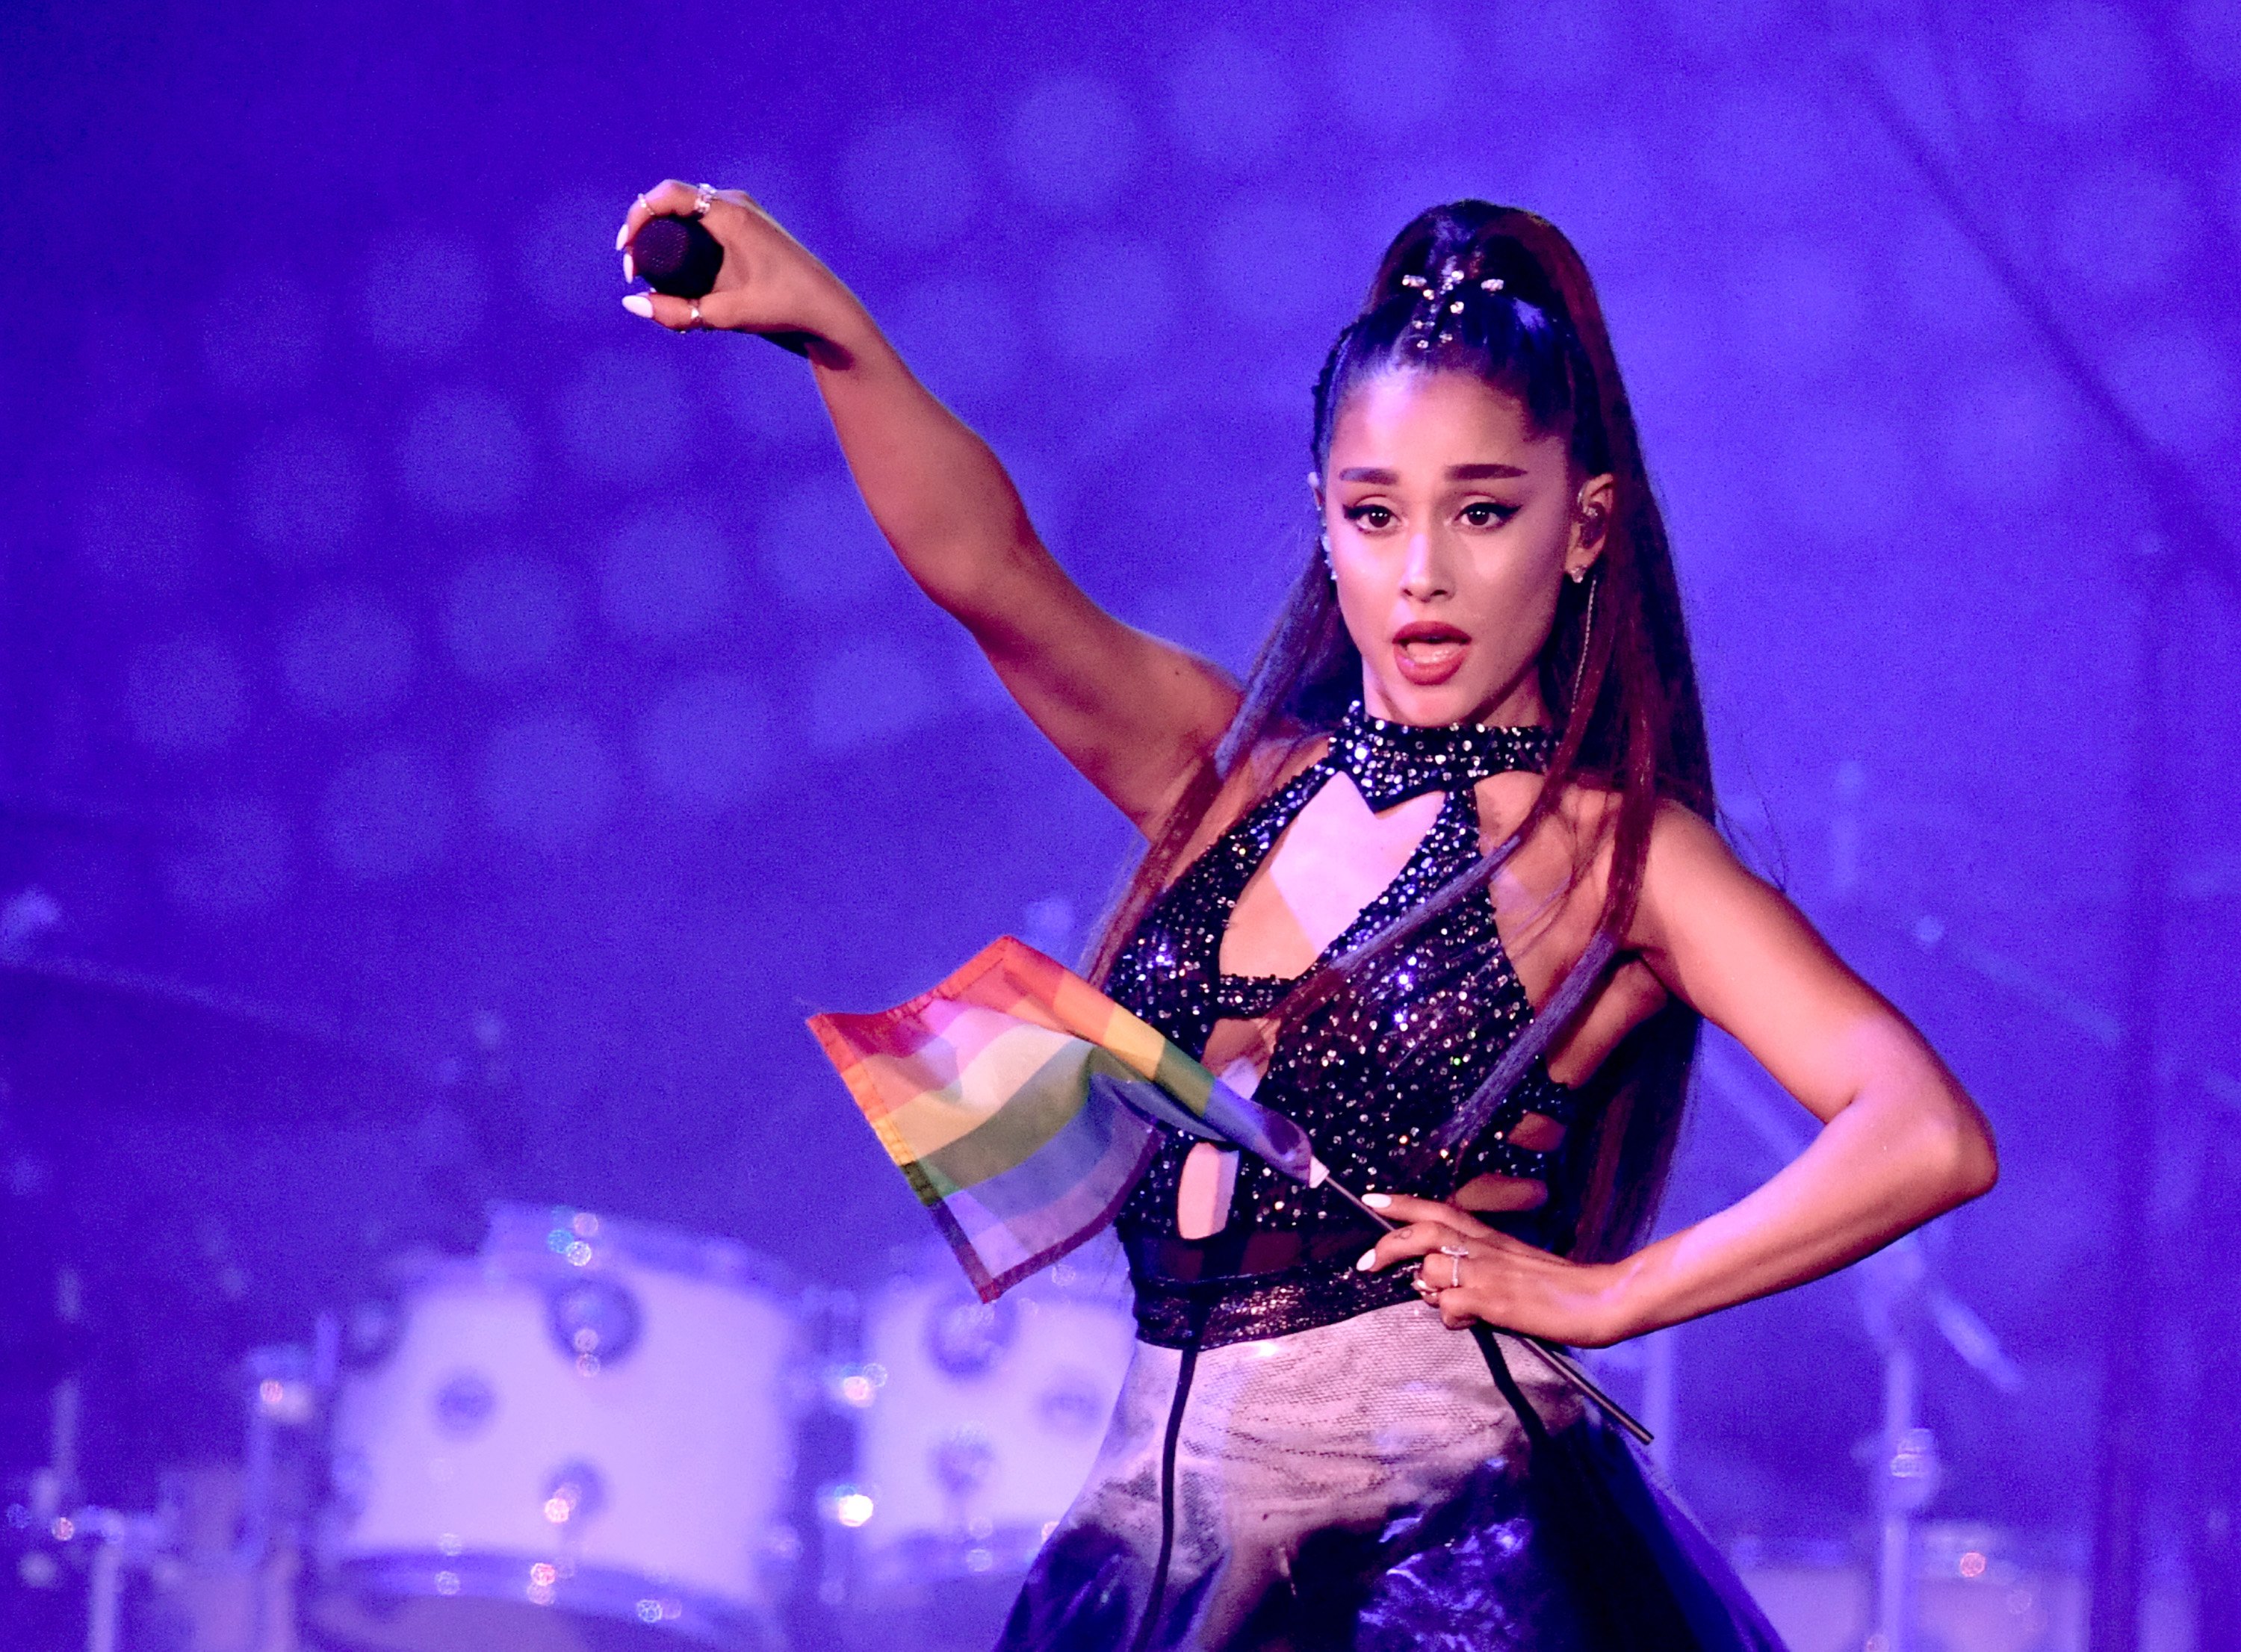 Ariana Grande performs onstage during the 2018 iHeartRadio Wango Tango on June 2, 2018 in Los Angeles, California.